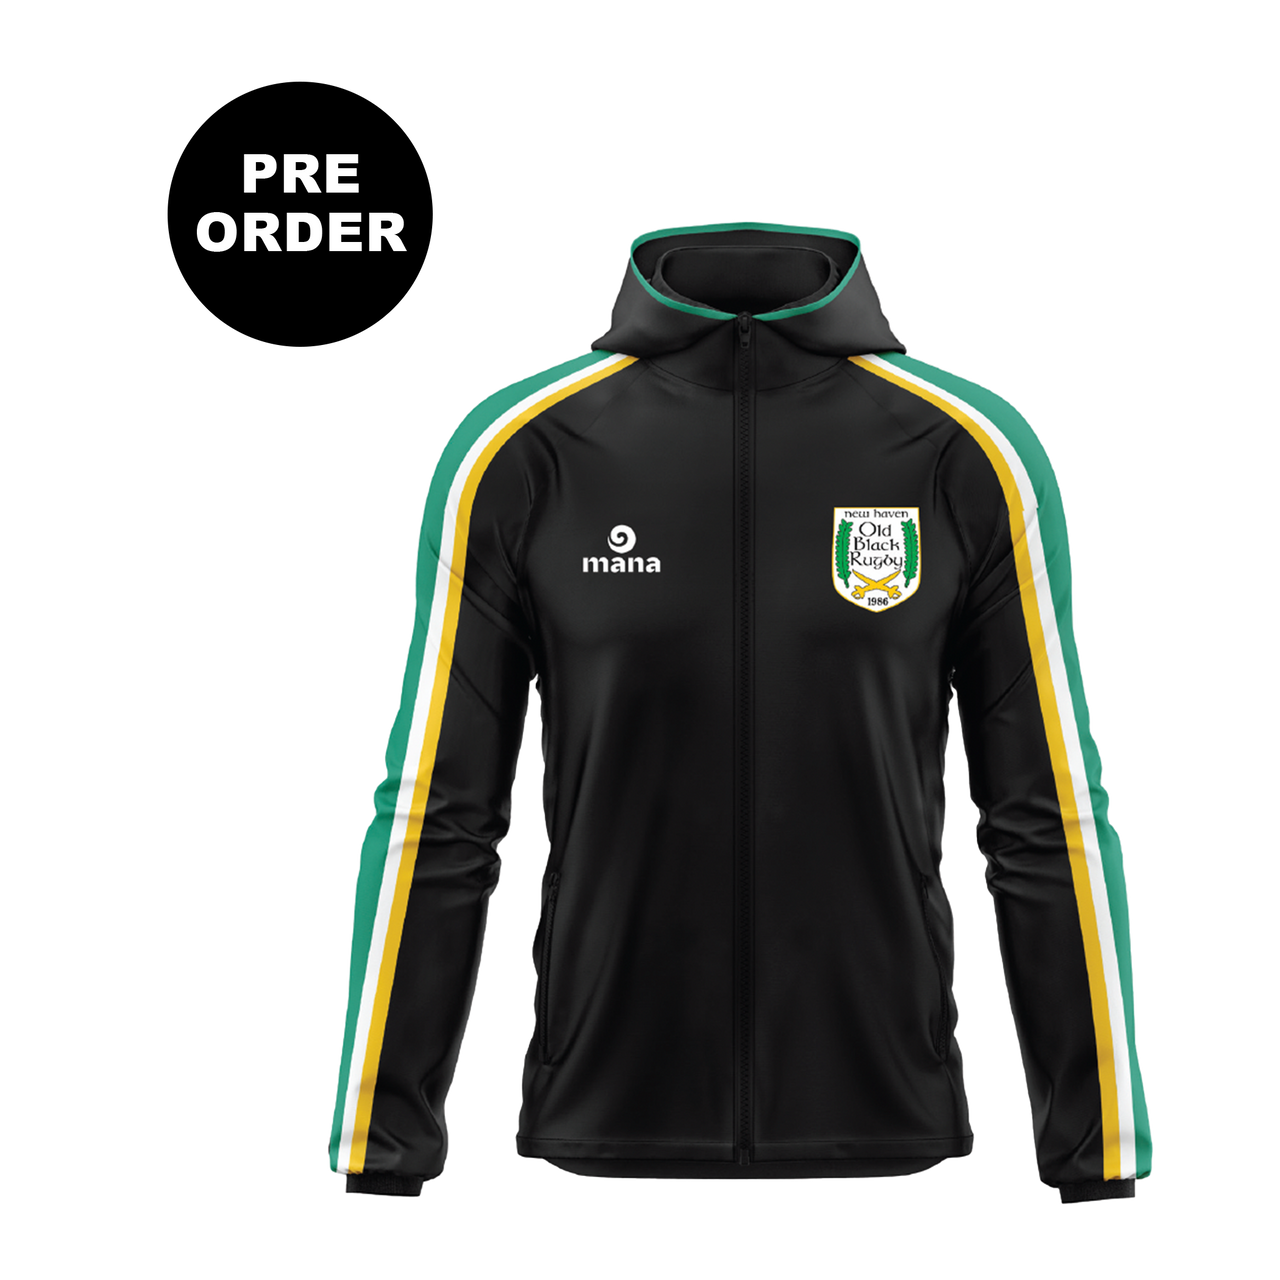 New Haven Rugby Warm Up Jacket